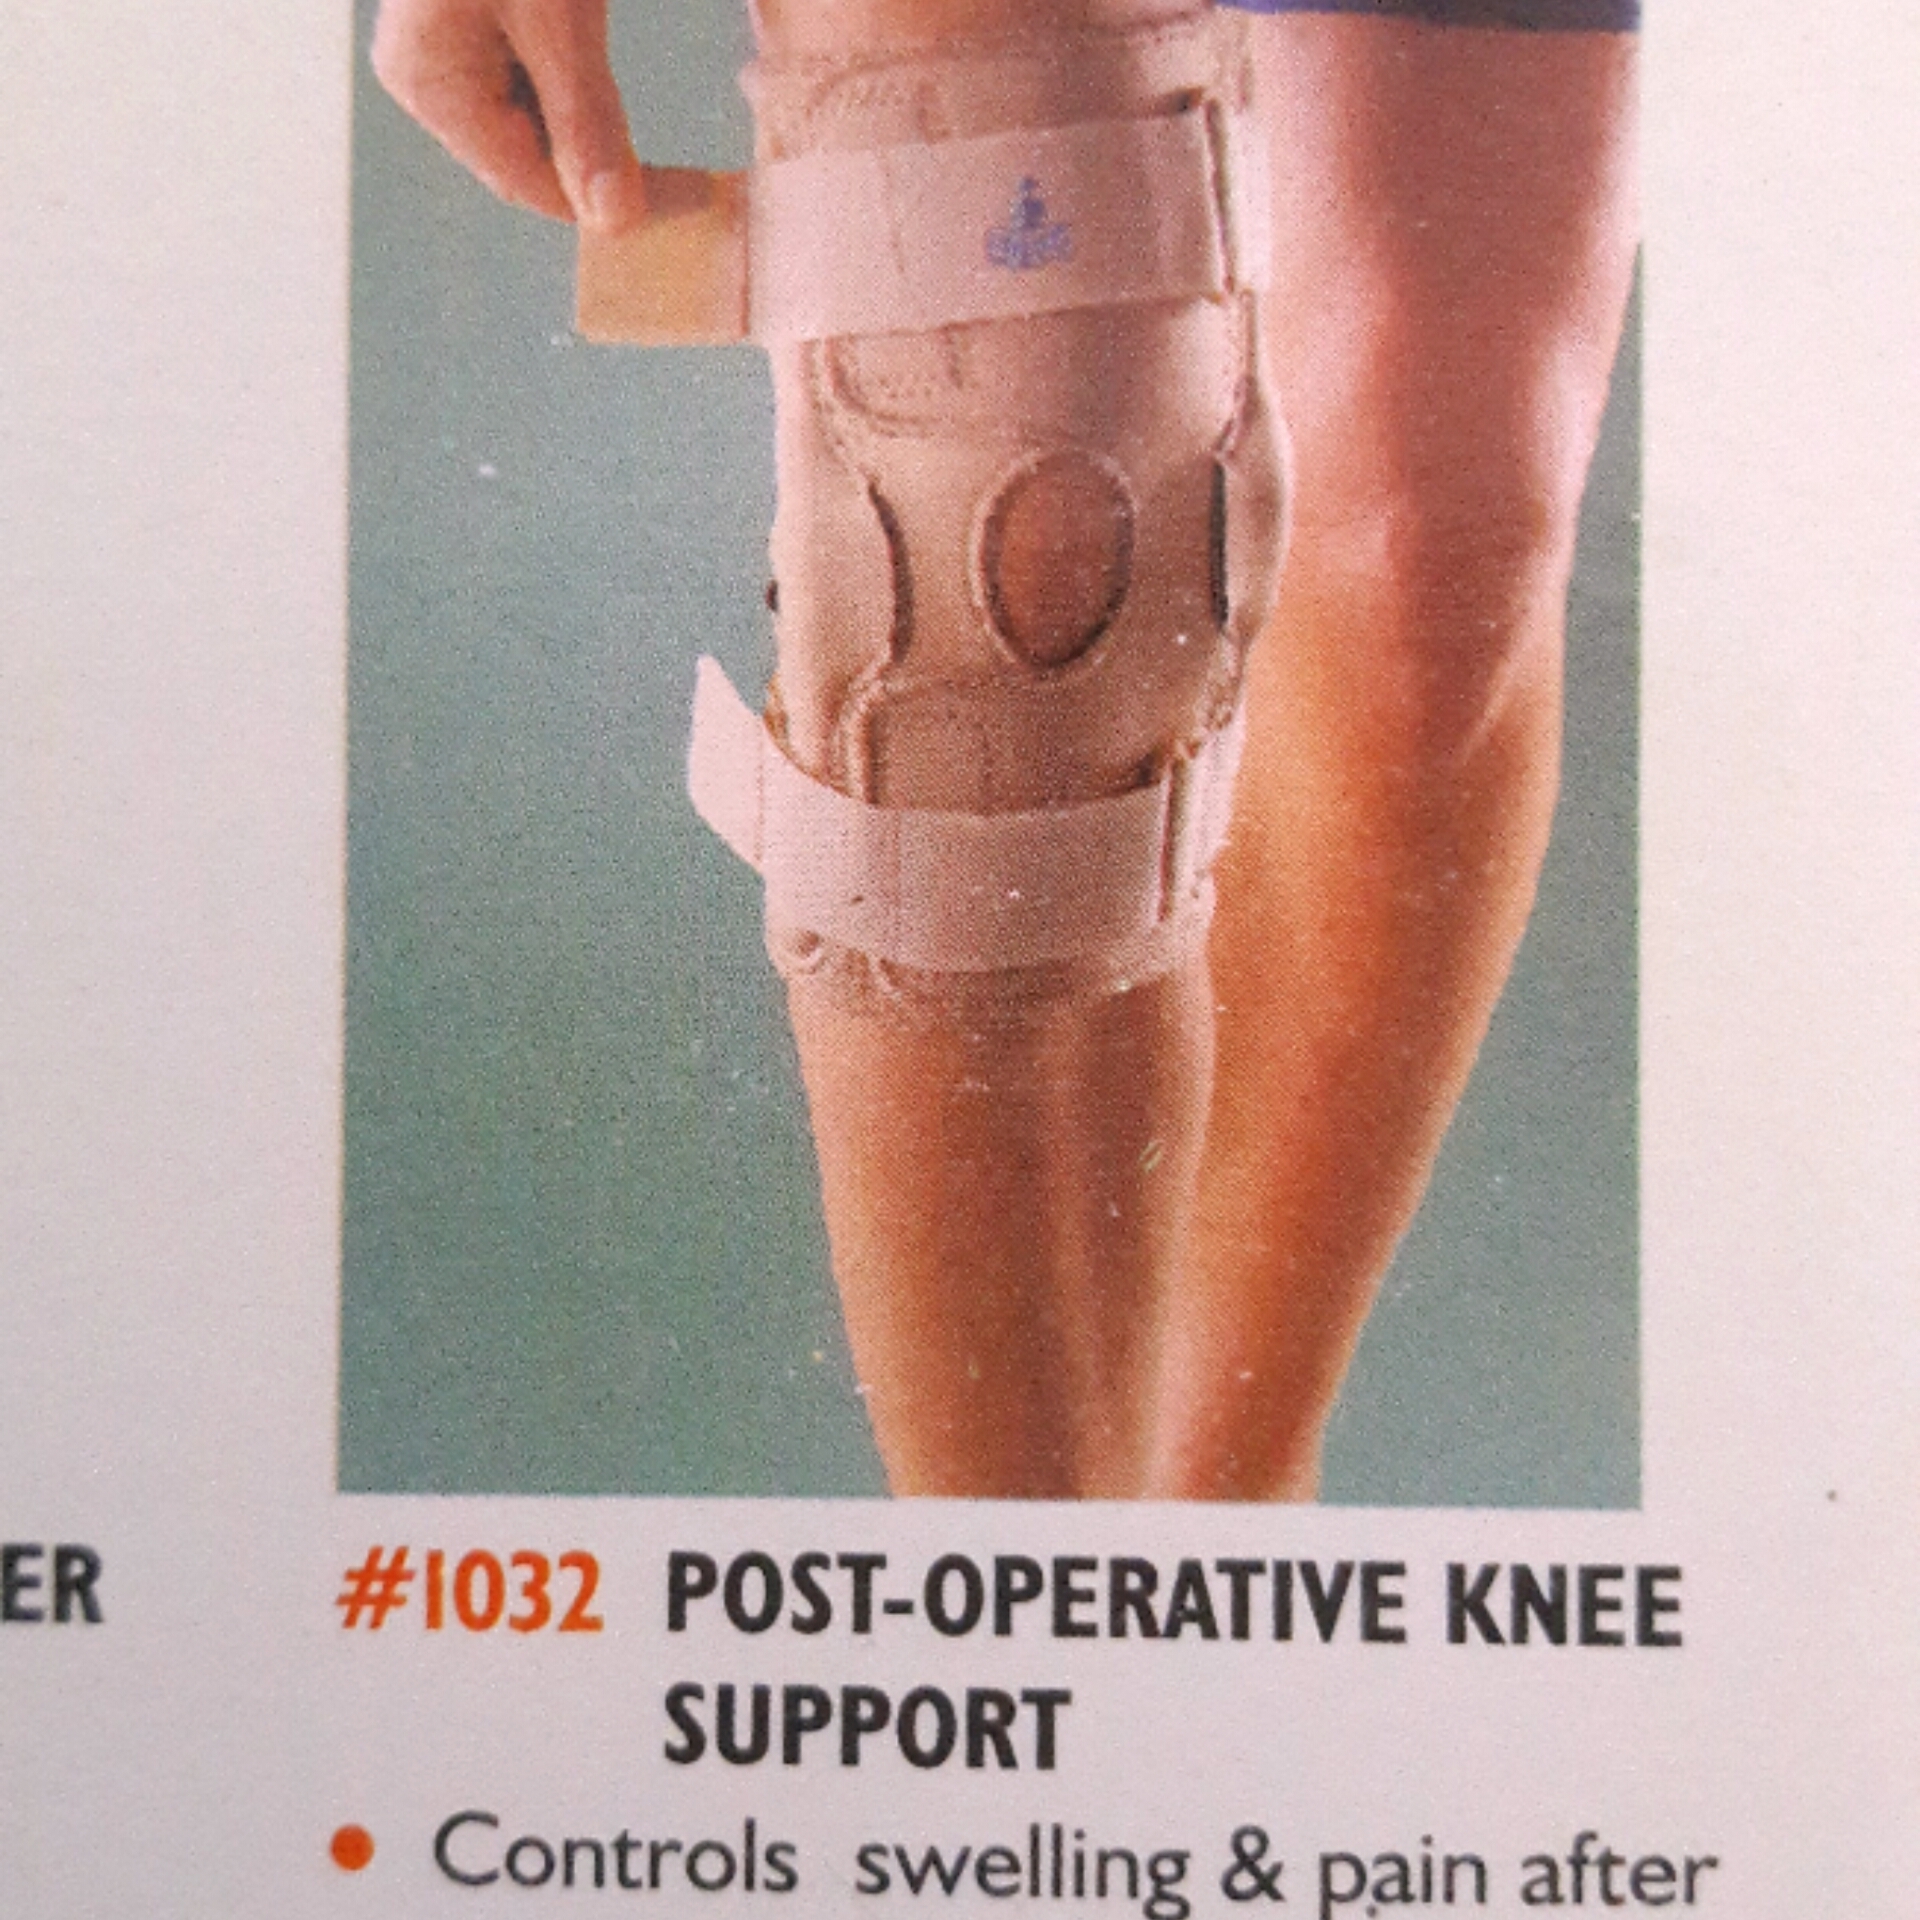 POST OPERATIVE KNEE SUPPORT OPPO 1032